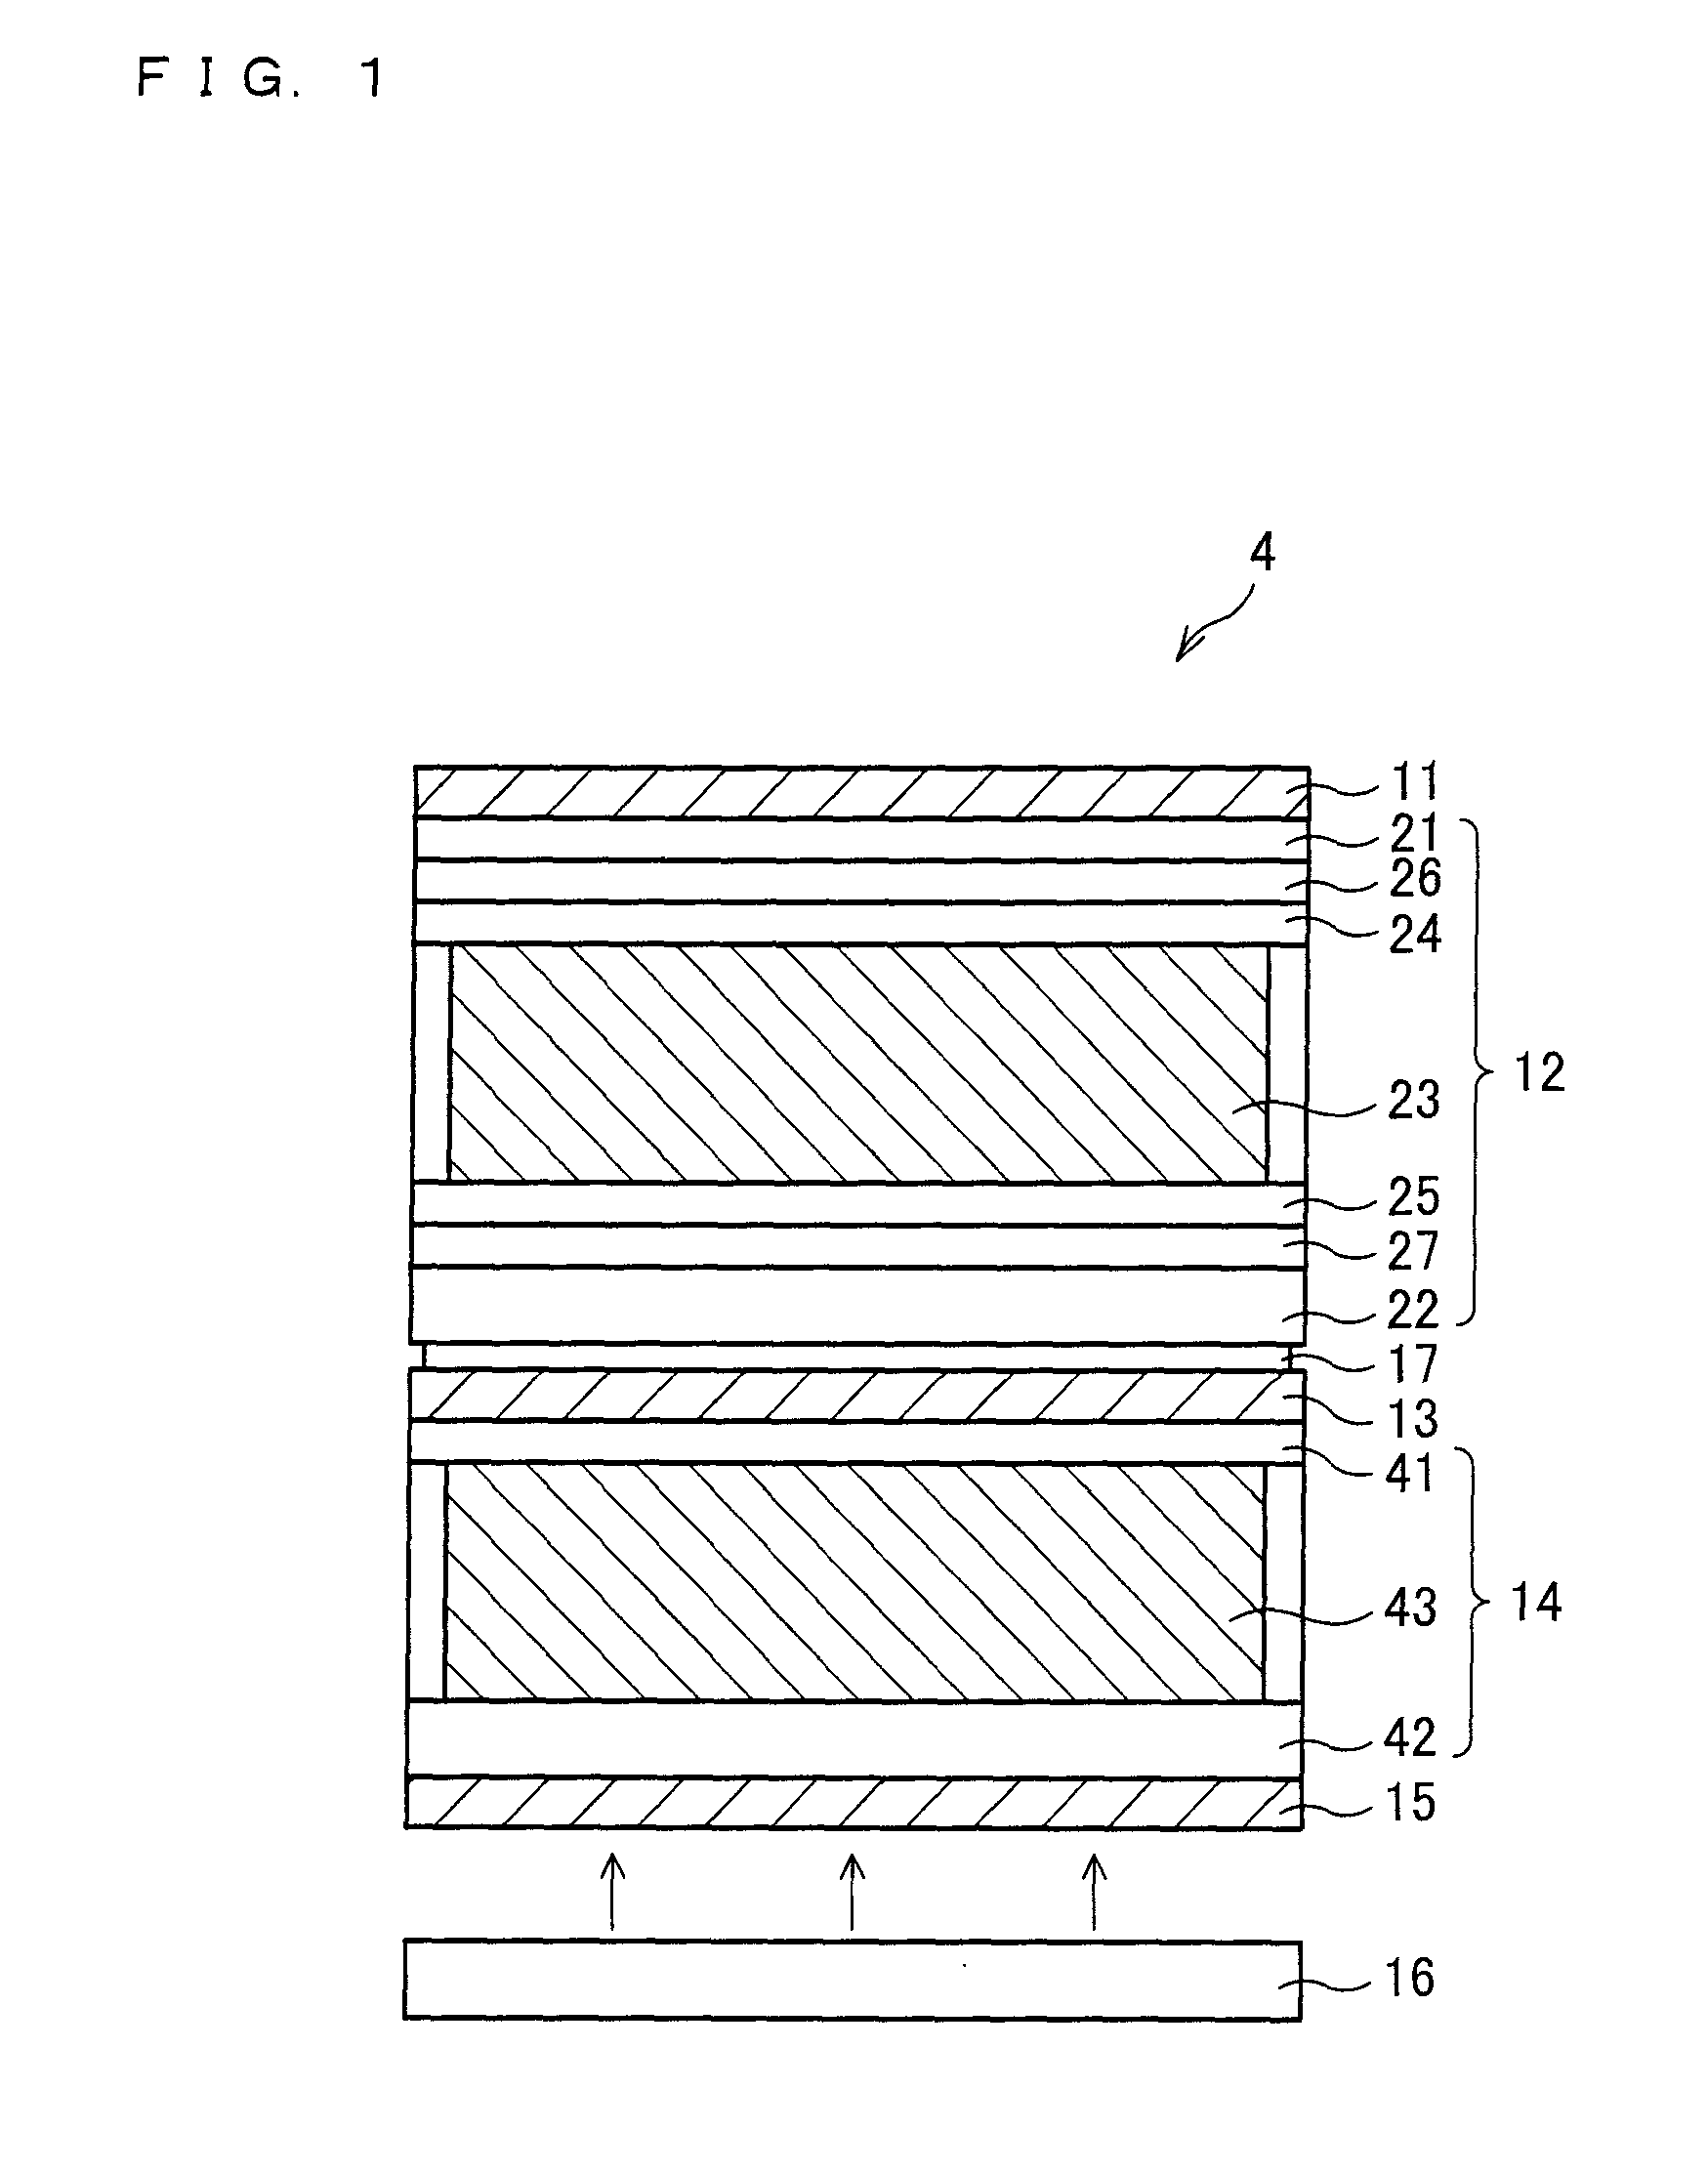 Display device, viewing angle control device, and electronic apparatus